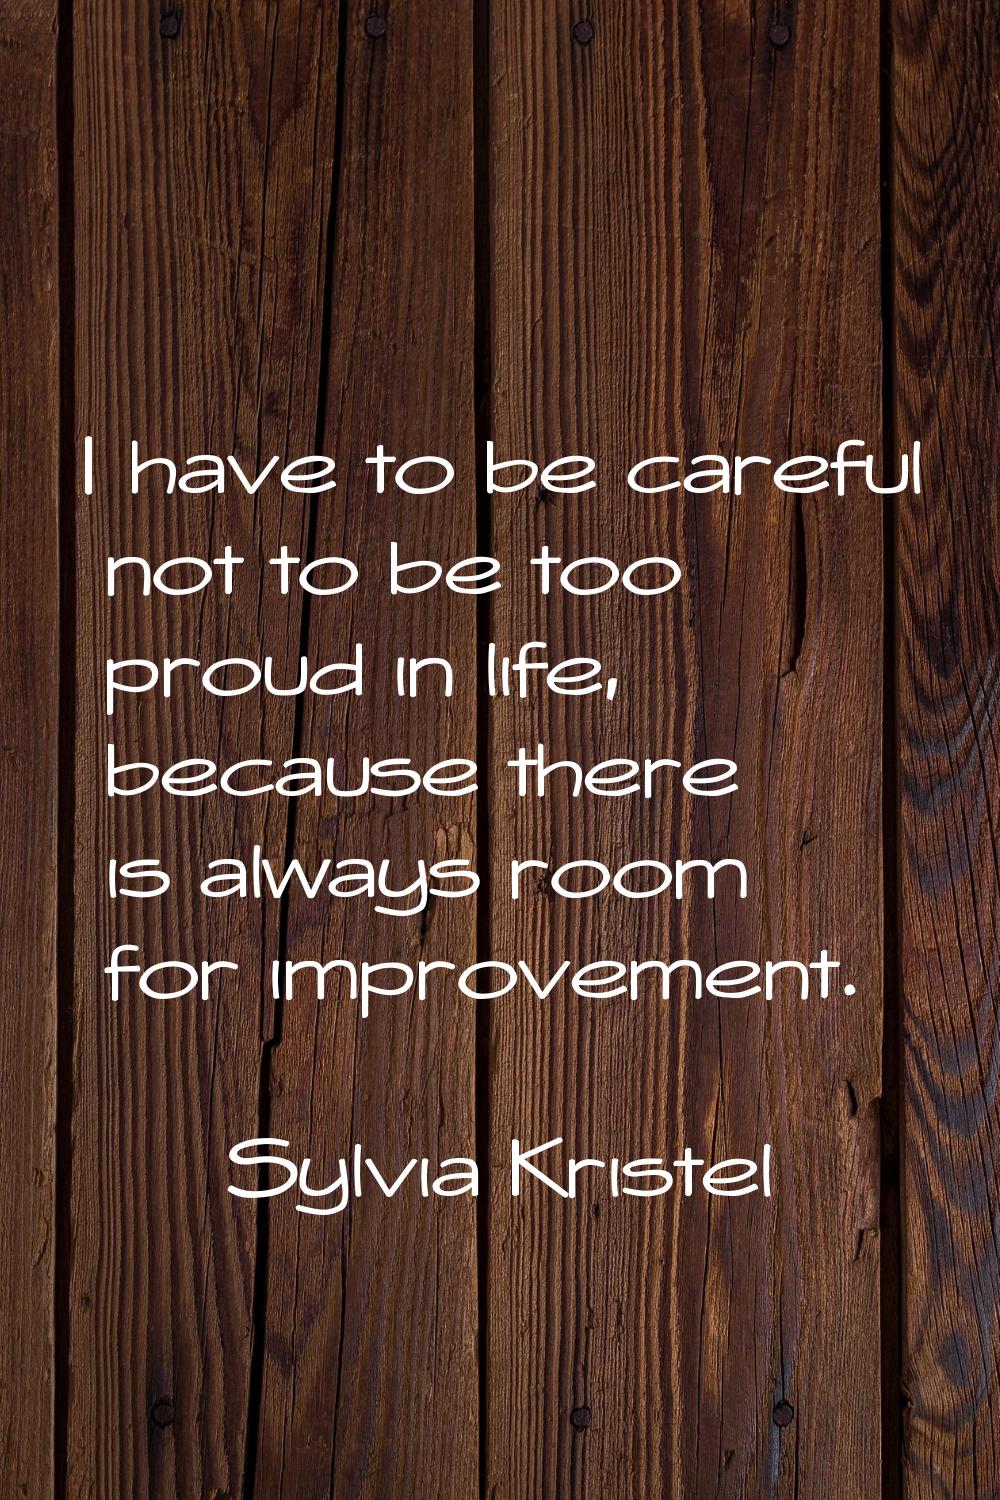 I have to be careful not to be too proud in life, because there is always room for improvement.